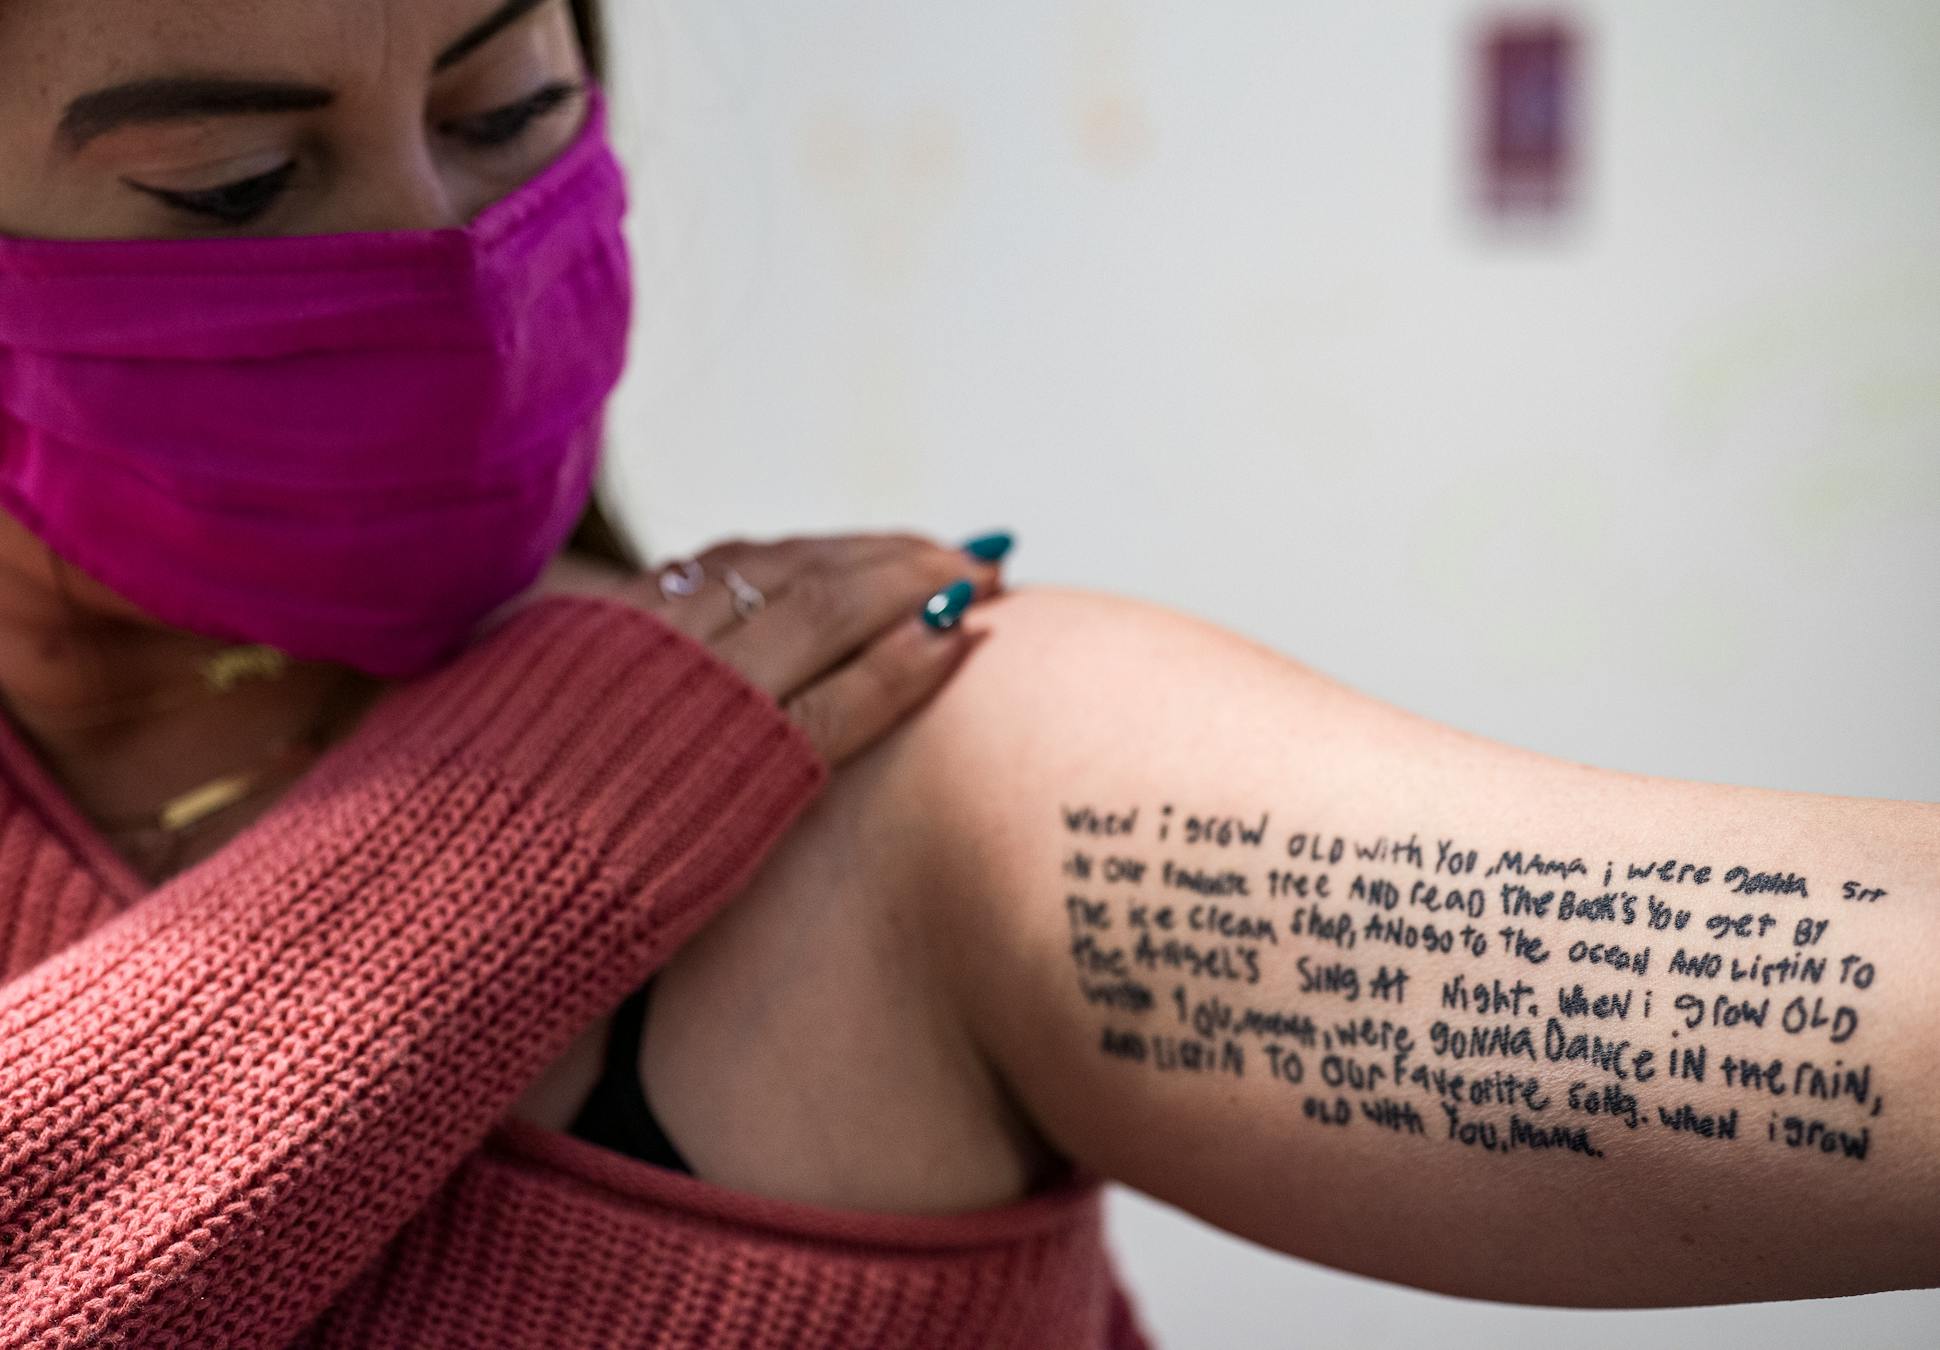 Brittani Senser has a poem tattooed on her arm from daughter Aria Burch-Senser, who completed suicide Feb. 6, 2019.